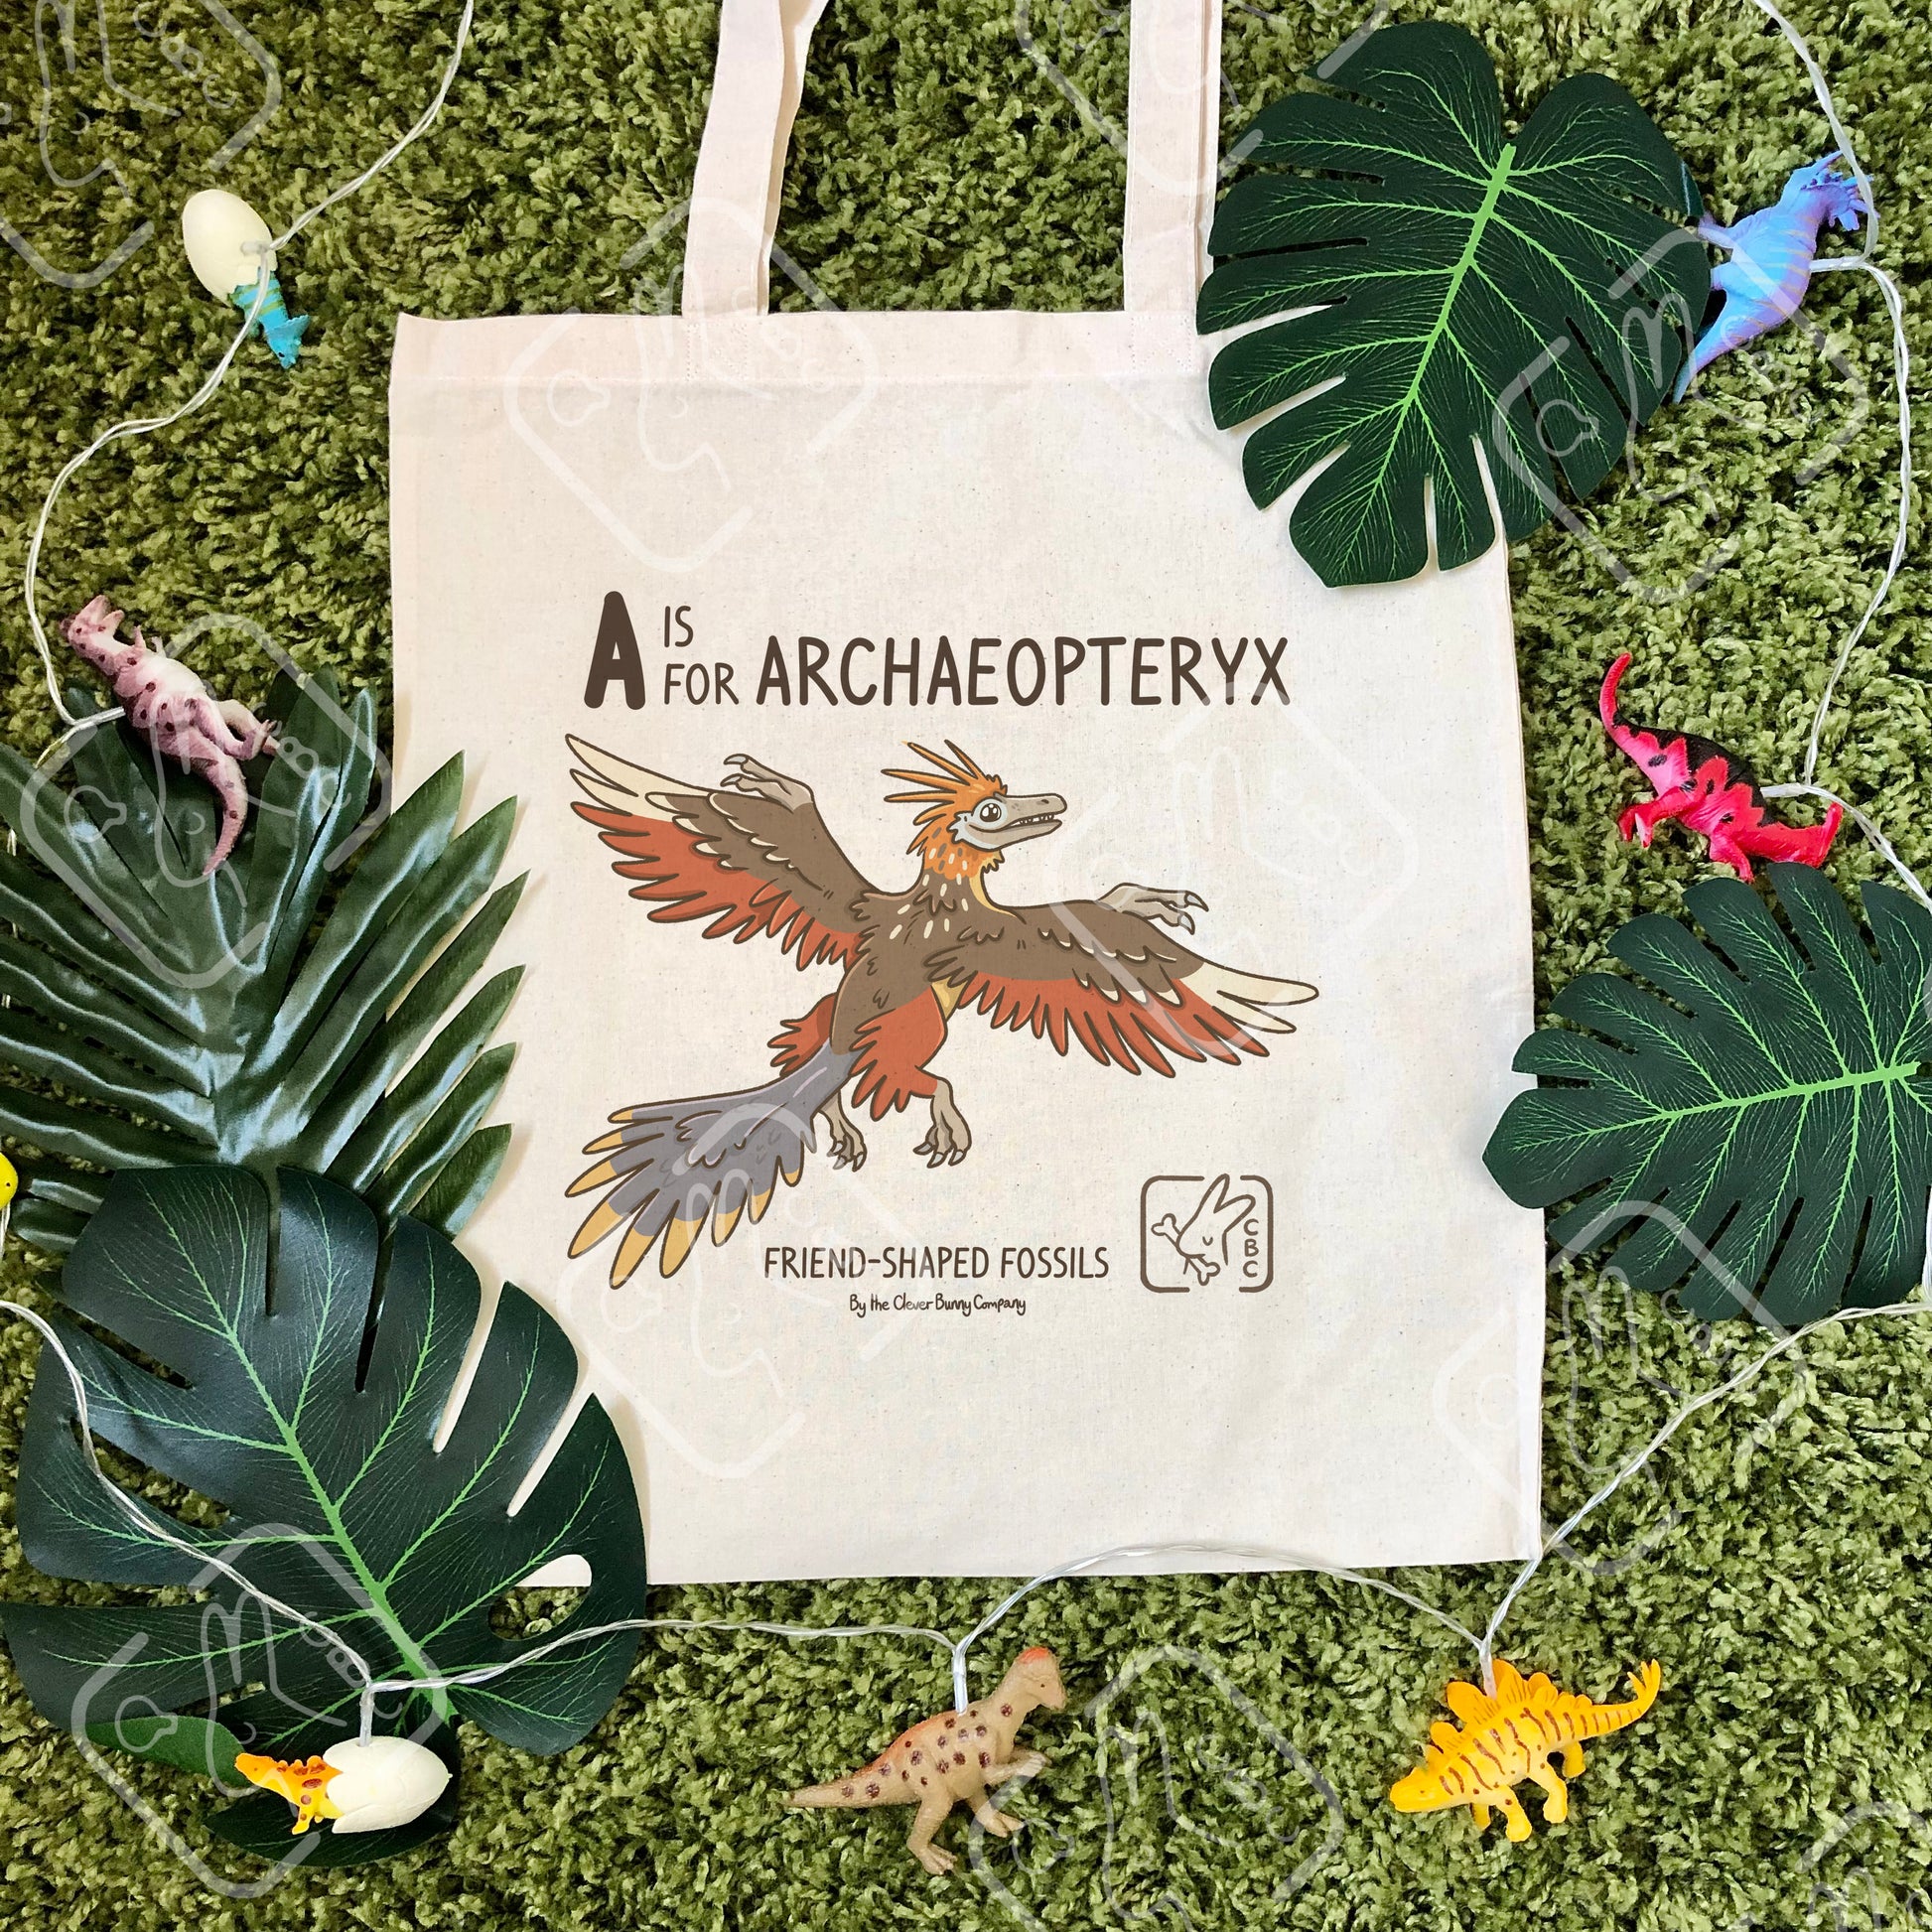 A tote bag featuring an Archaeopteryx. Text reads "A is for Archaeopteryx" and "Friend-shaped Fossils by the Clever Bunny Company."